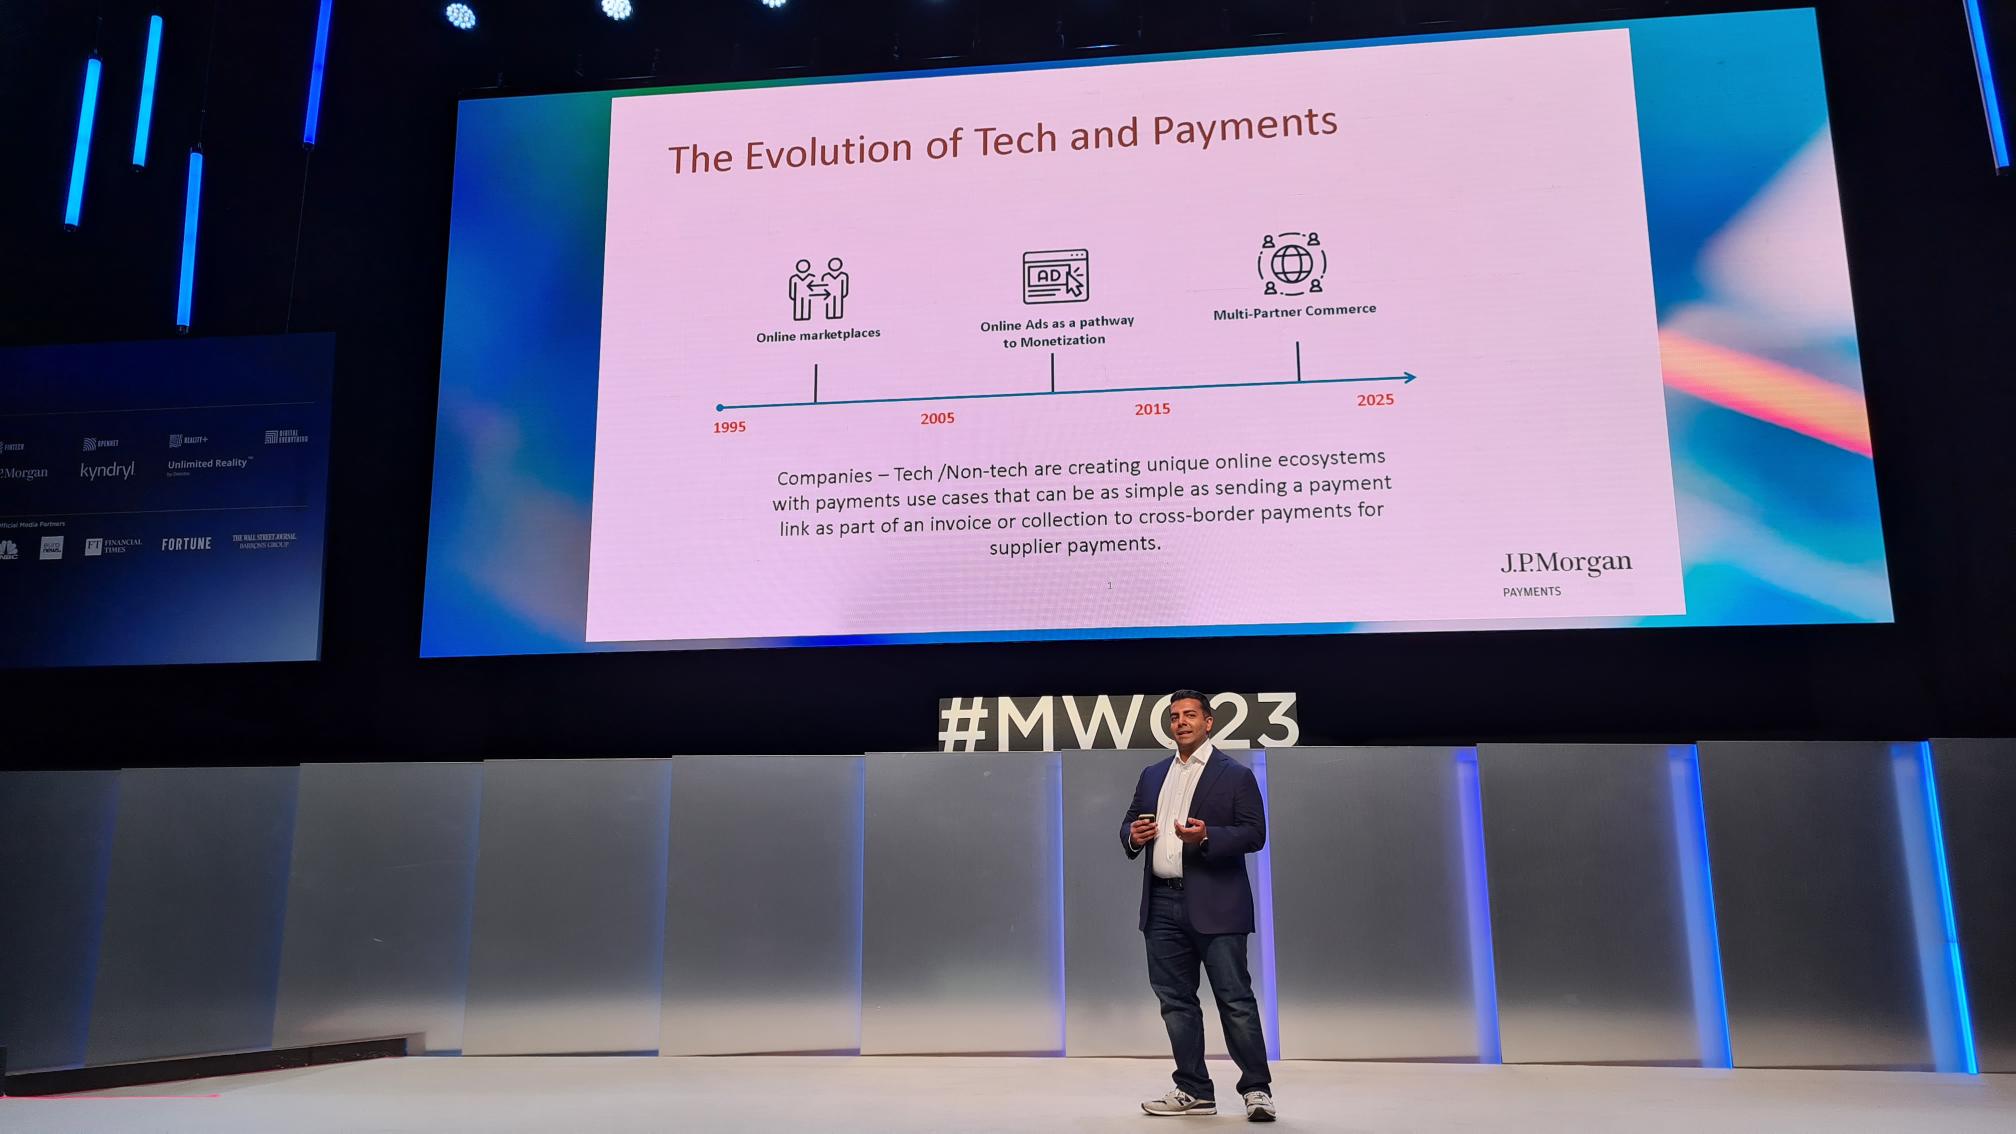 Embedded finance at MWC23